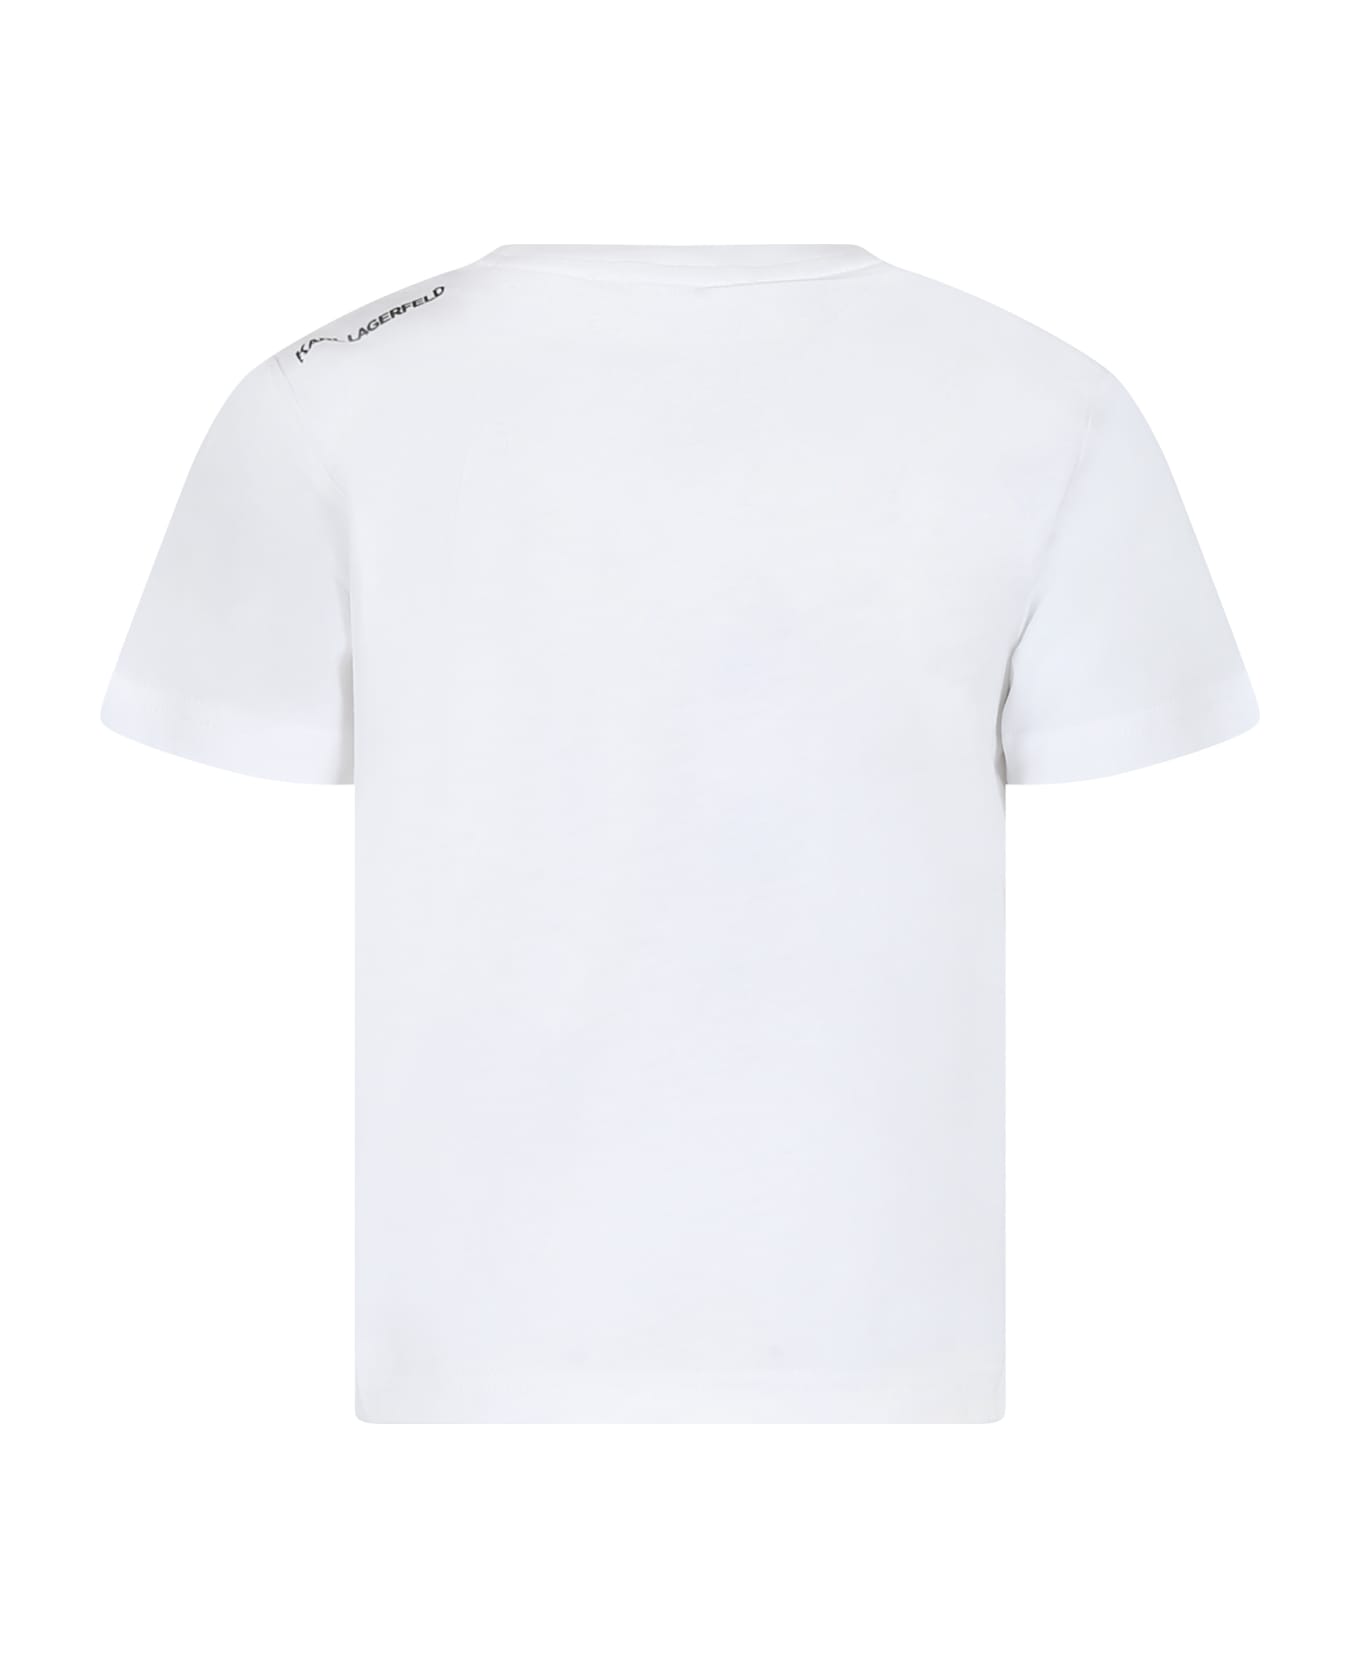 Karl Lagerfeld Kids White T-shirt For Kids With Karl And Golf Bag Print - White